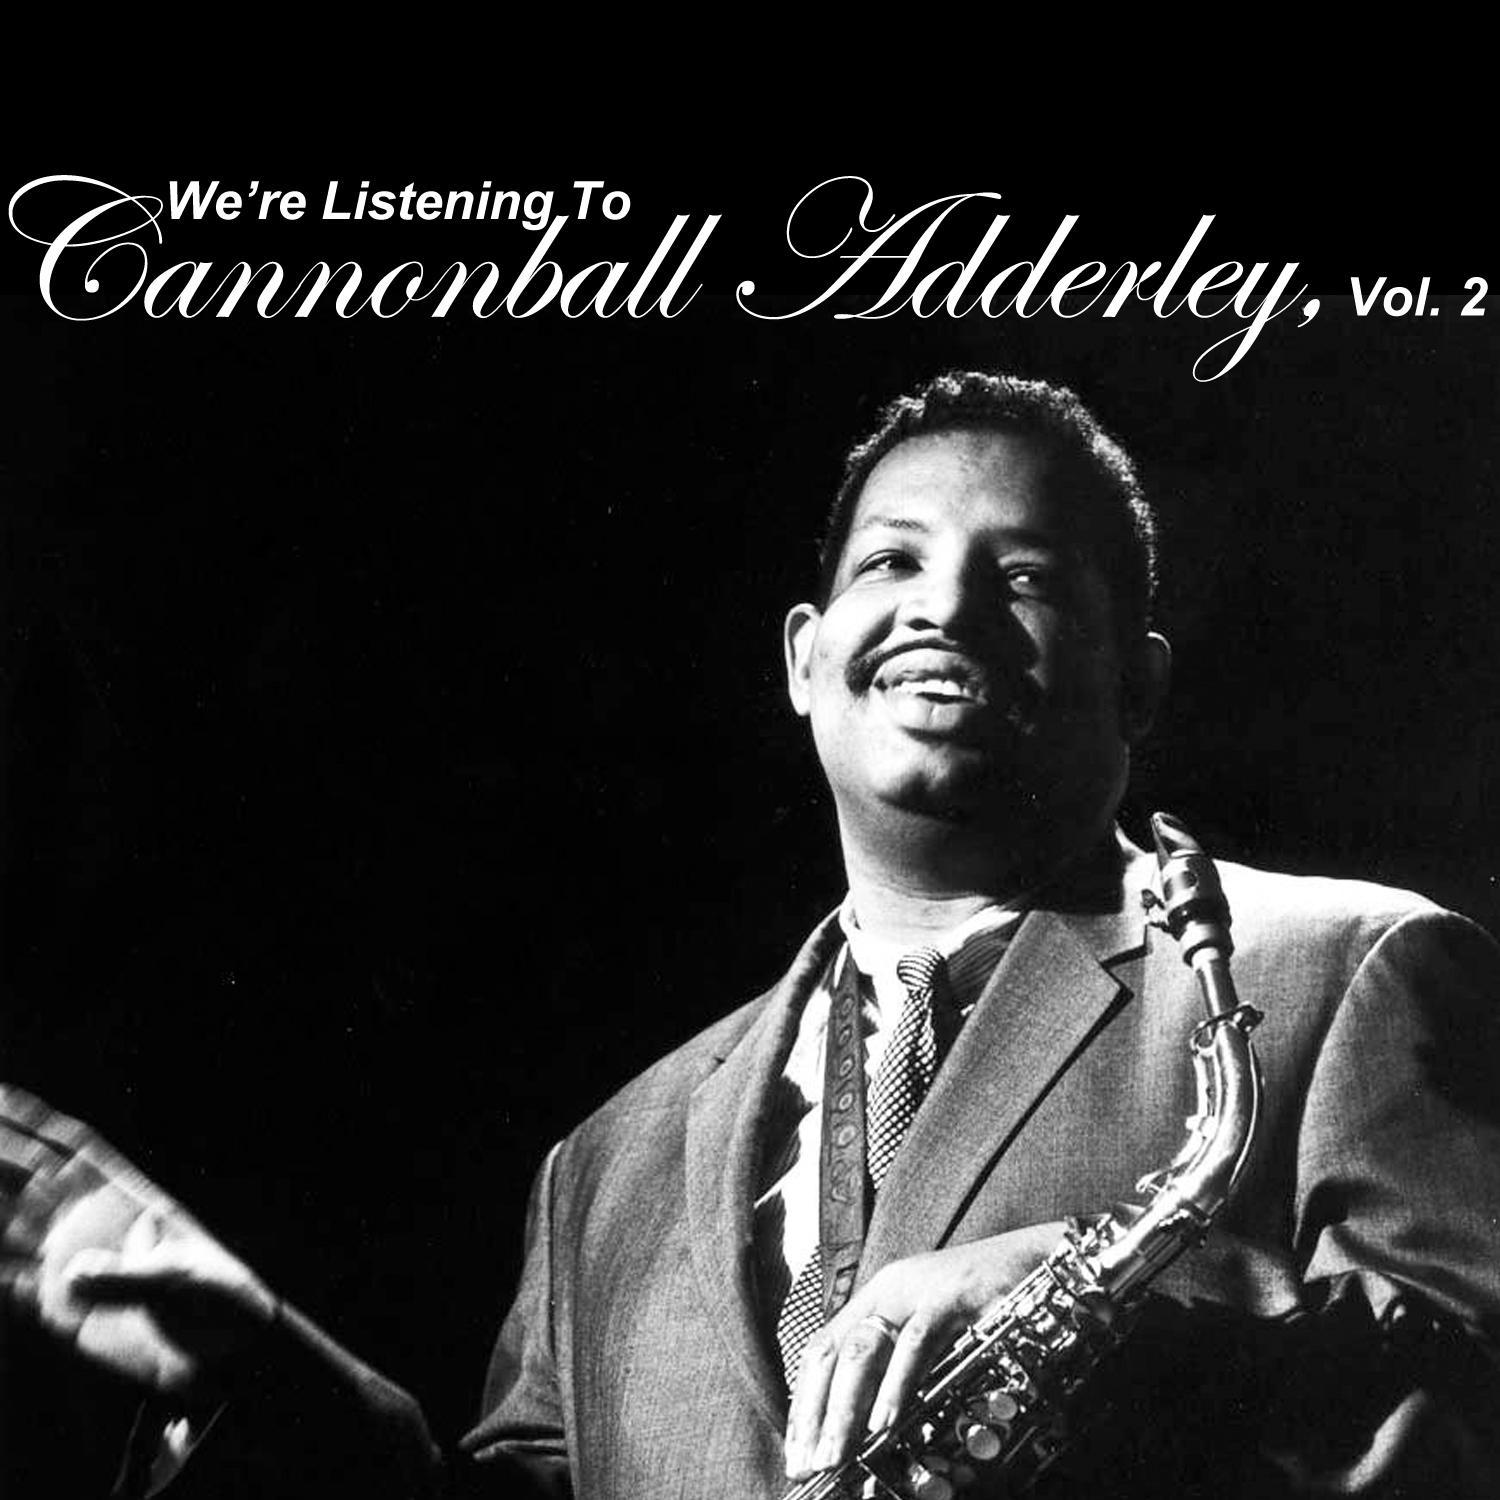 We're Listening to Cannonball Adderley, Vol. 2